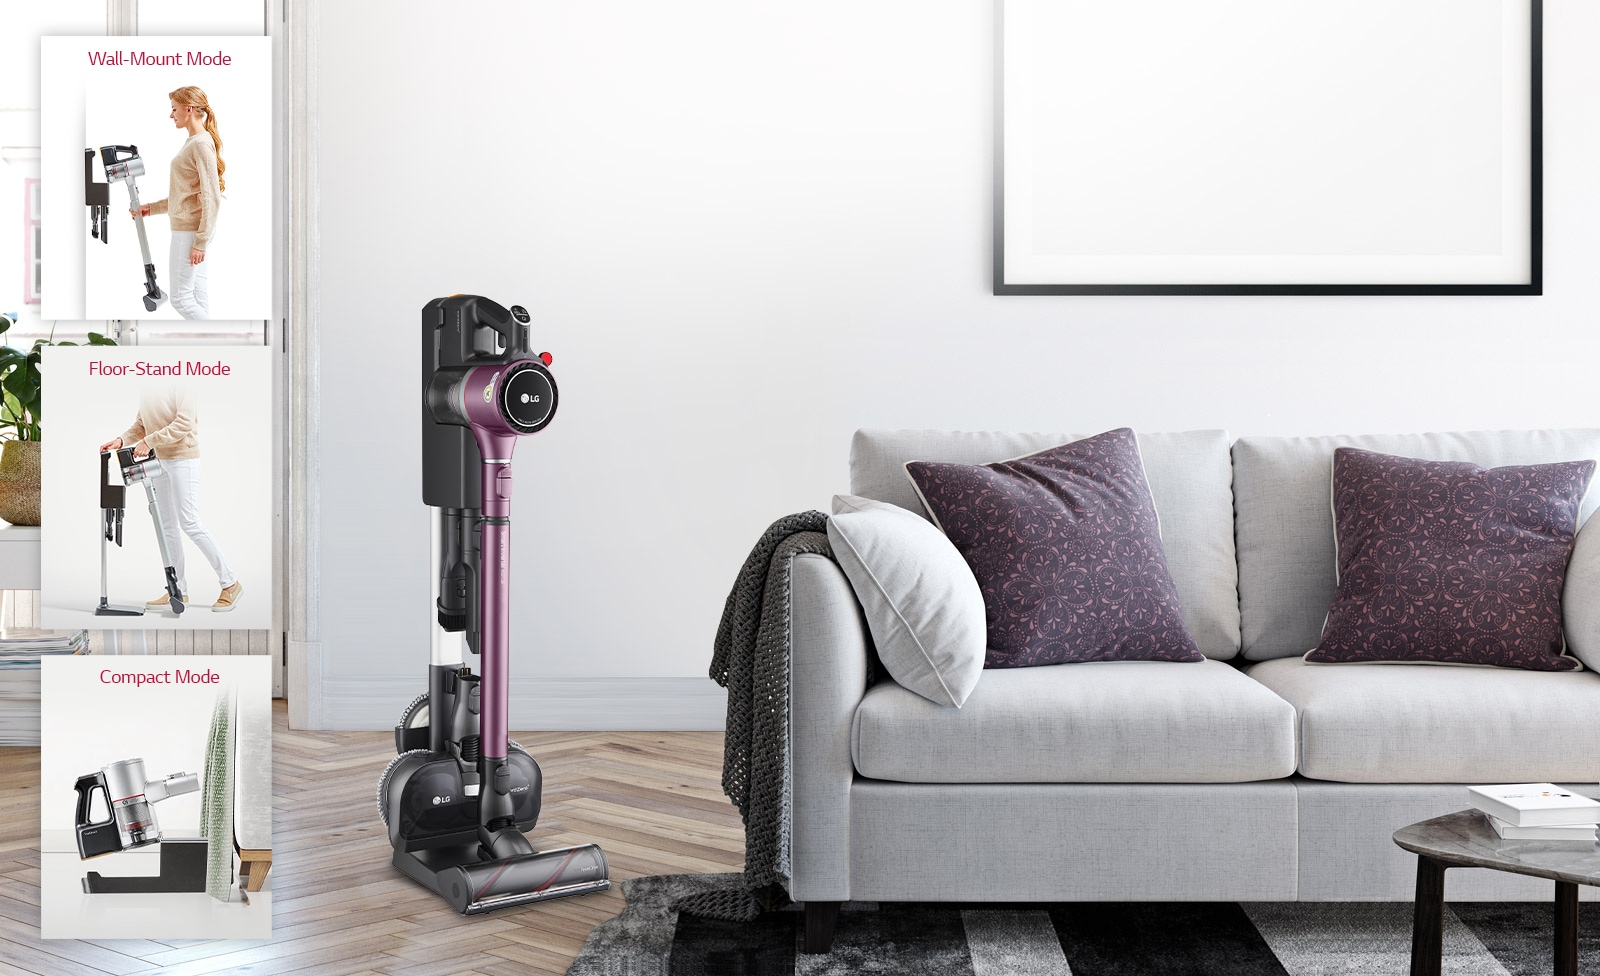 Three images show the vacuum cleaner in the charging stand in various locations: the first has the charging stand next to a couch, the second it is next to a desk, and the third it is next to a bed.